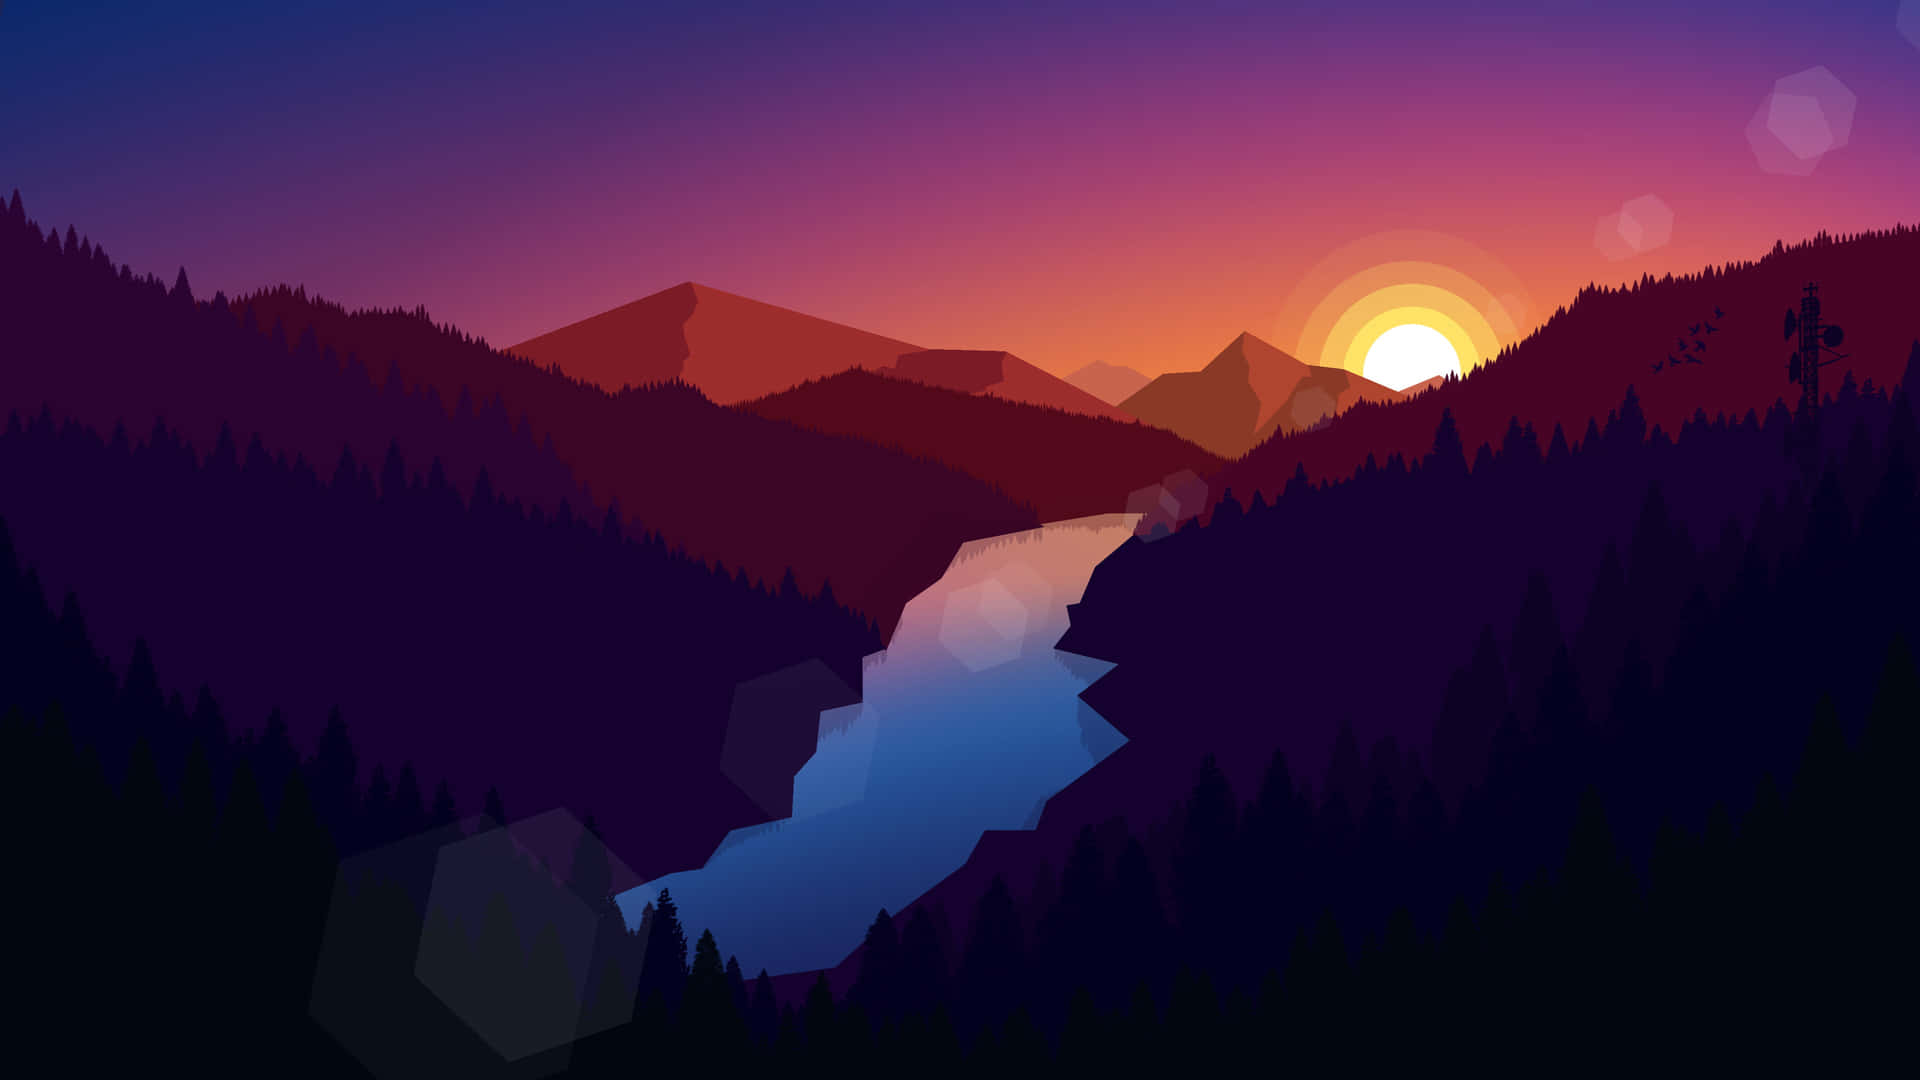 "A warm summer sunset over the majestic mountain range" Wallpaper